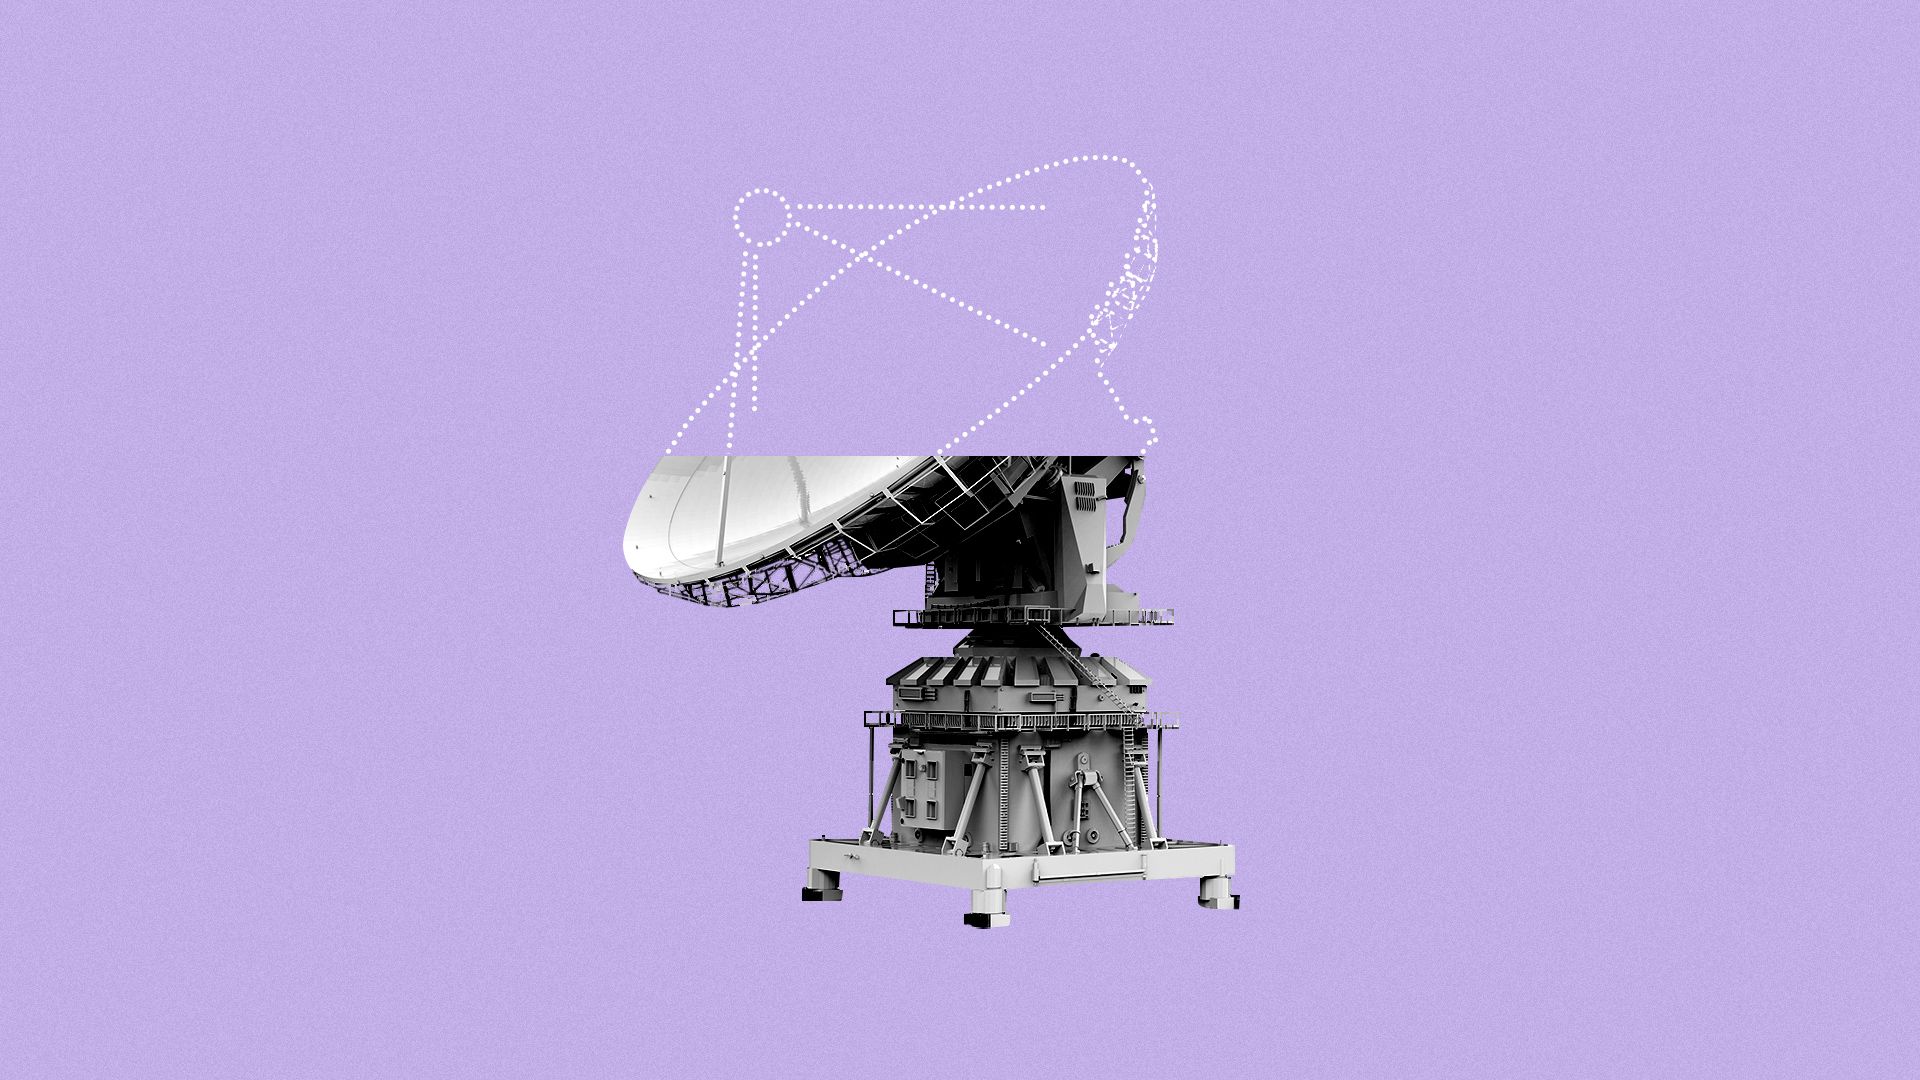 Illustration of a VLA, half of it is cut off with the rest shown as just an outline.